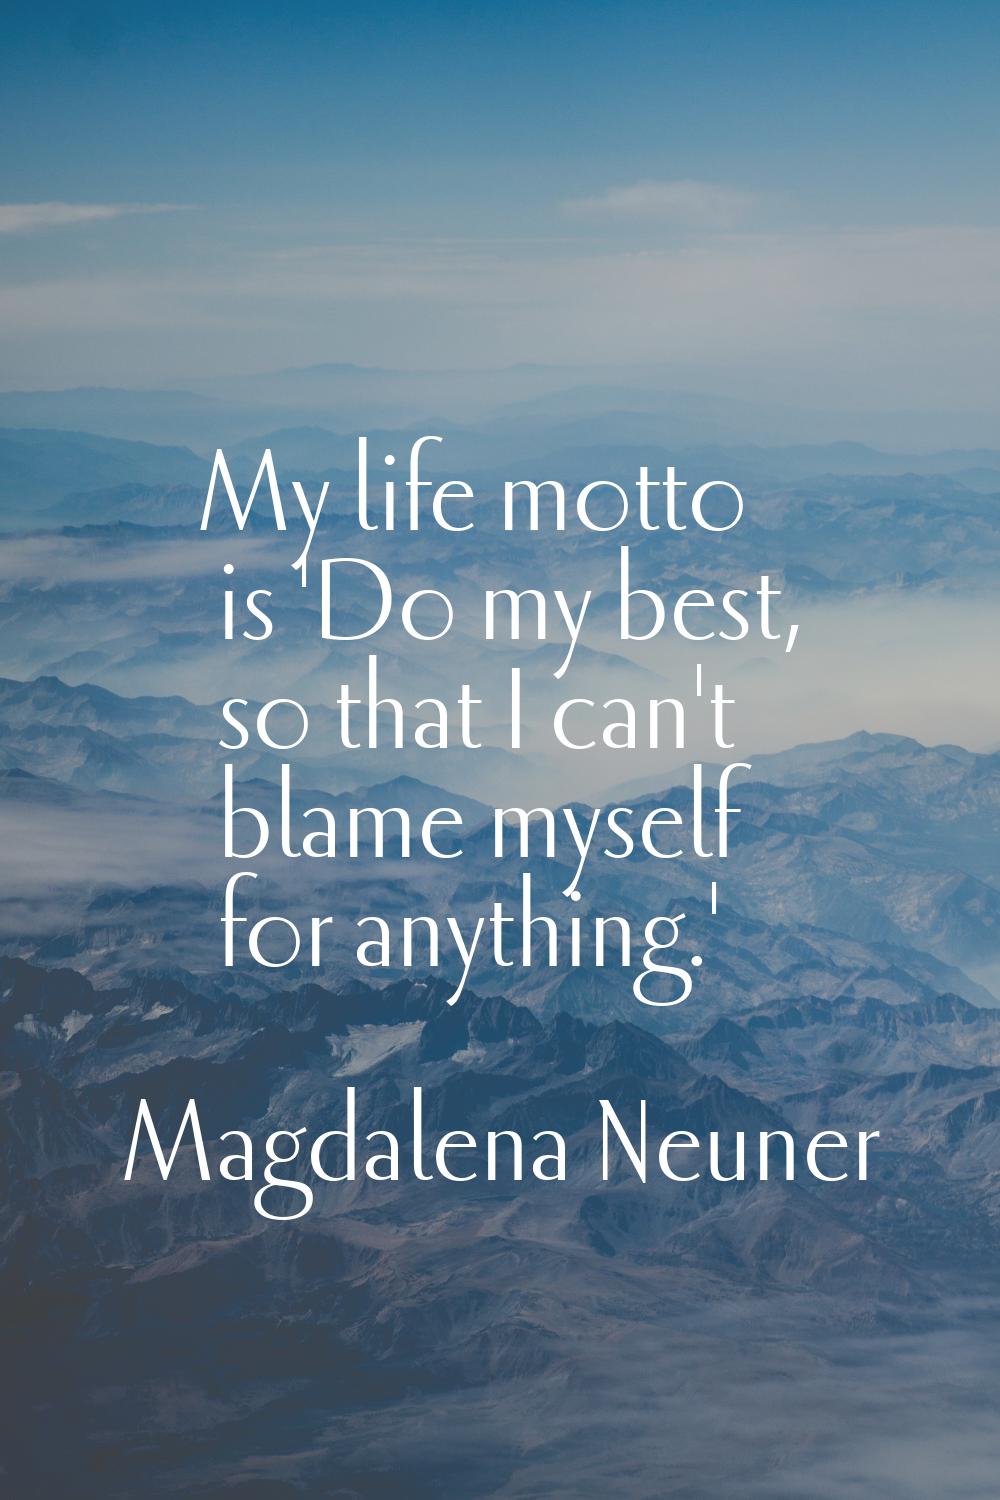 My life motto is 'Do my best, so that I can't blame myself for anything.'